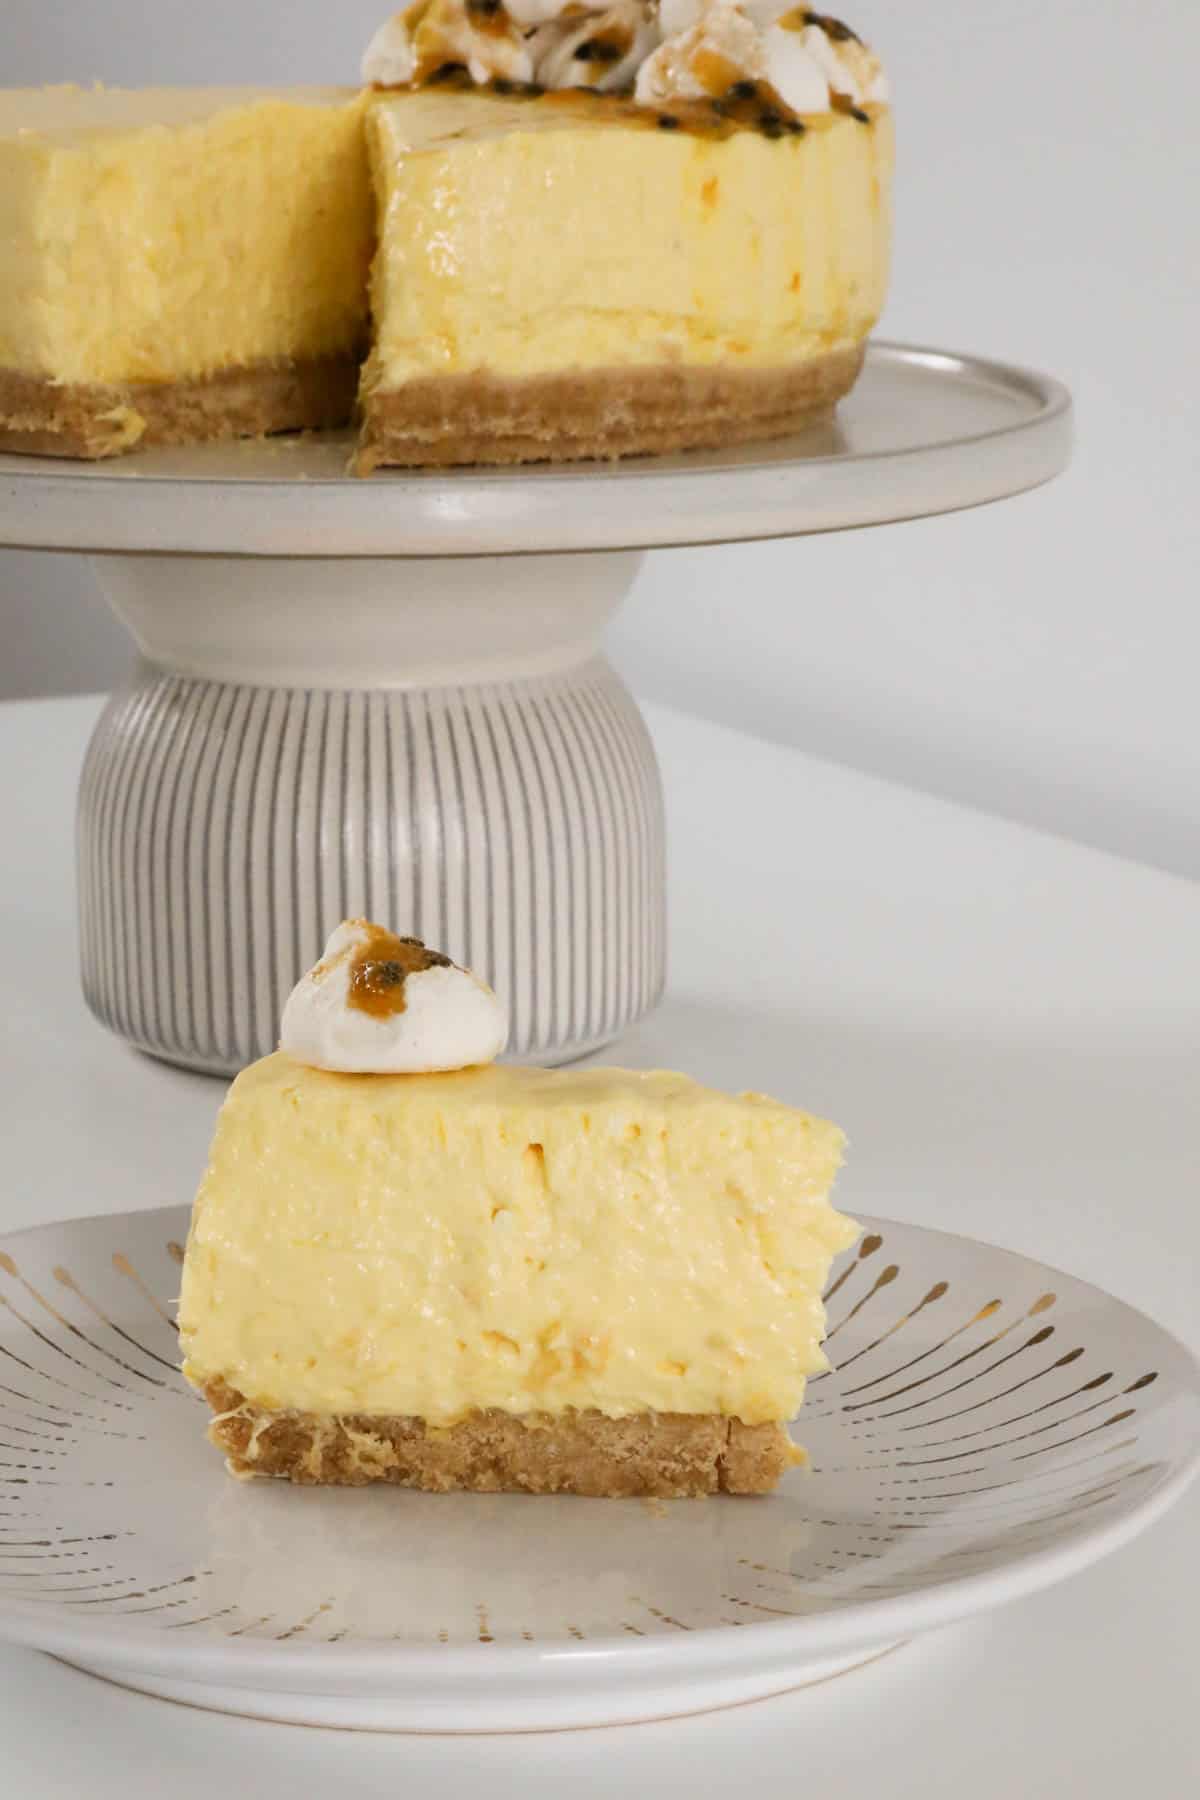 A creamy dessert on a cake stand with a slice on a plate.